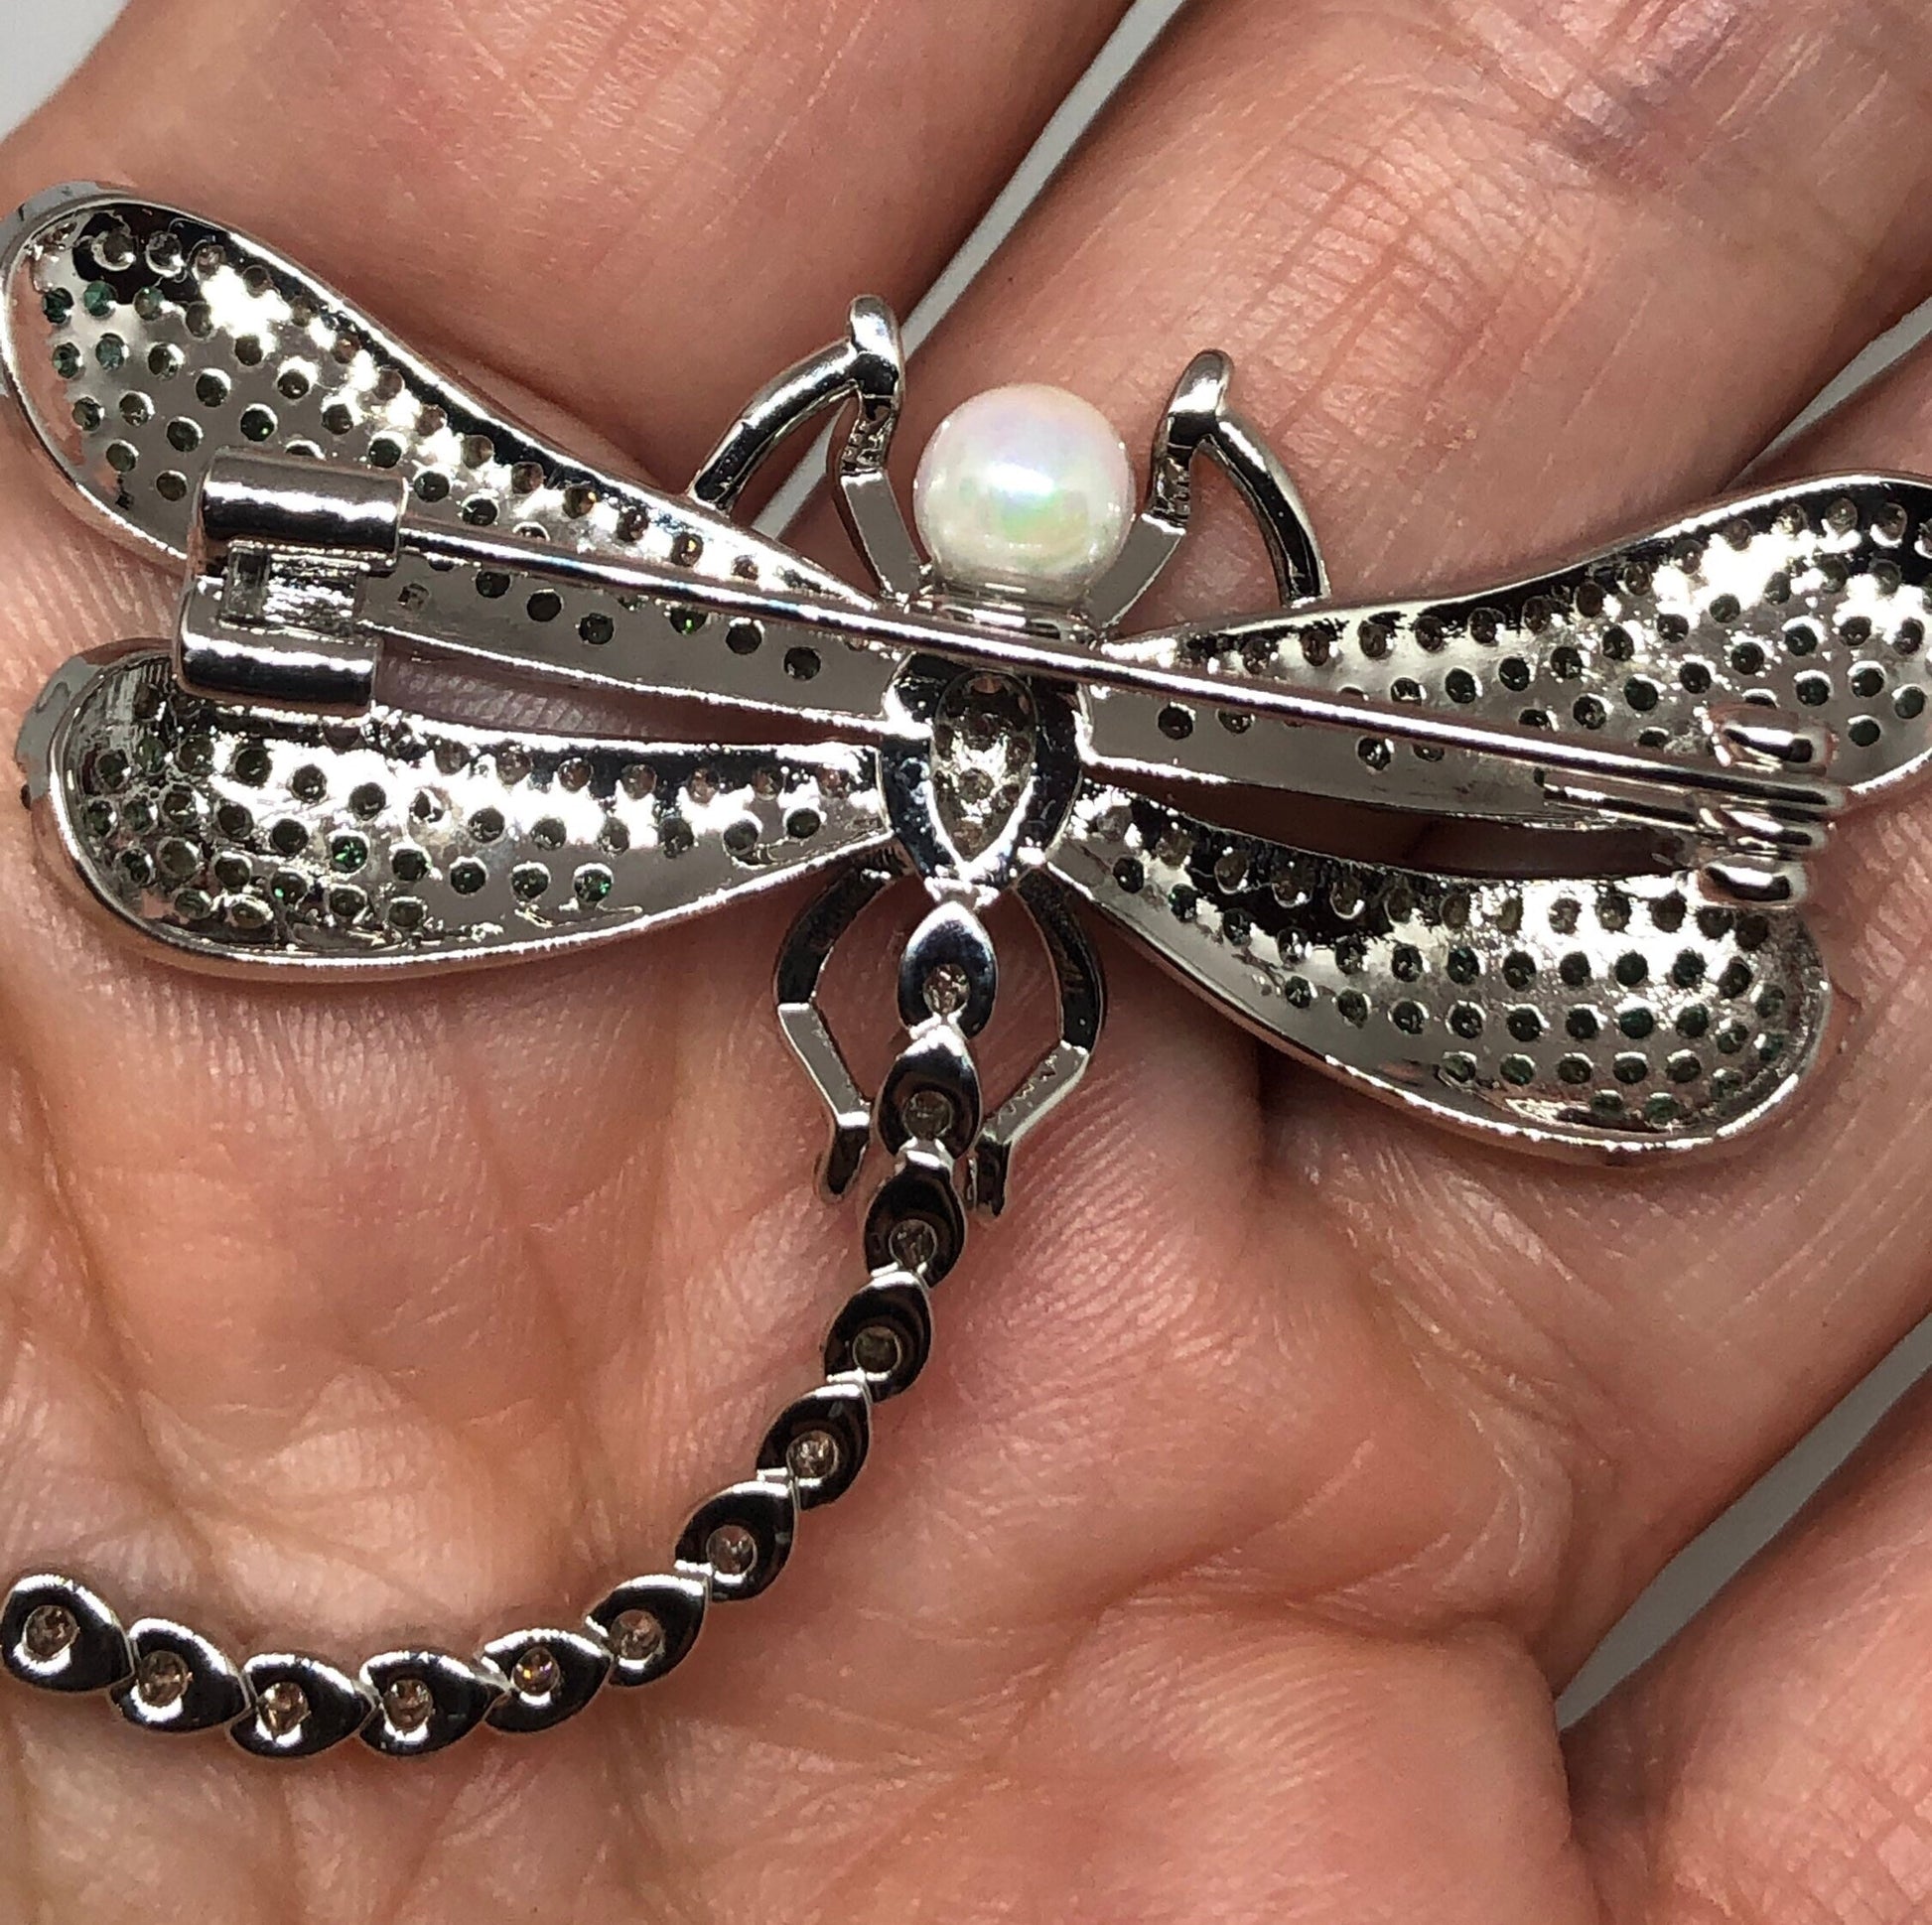 Vintage Green Crystal Gothic Styled Silver Finished Dragonfly Necklace Broach